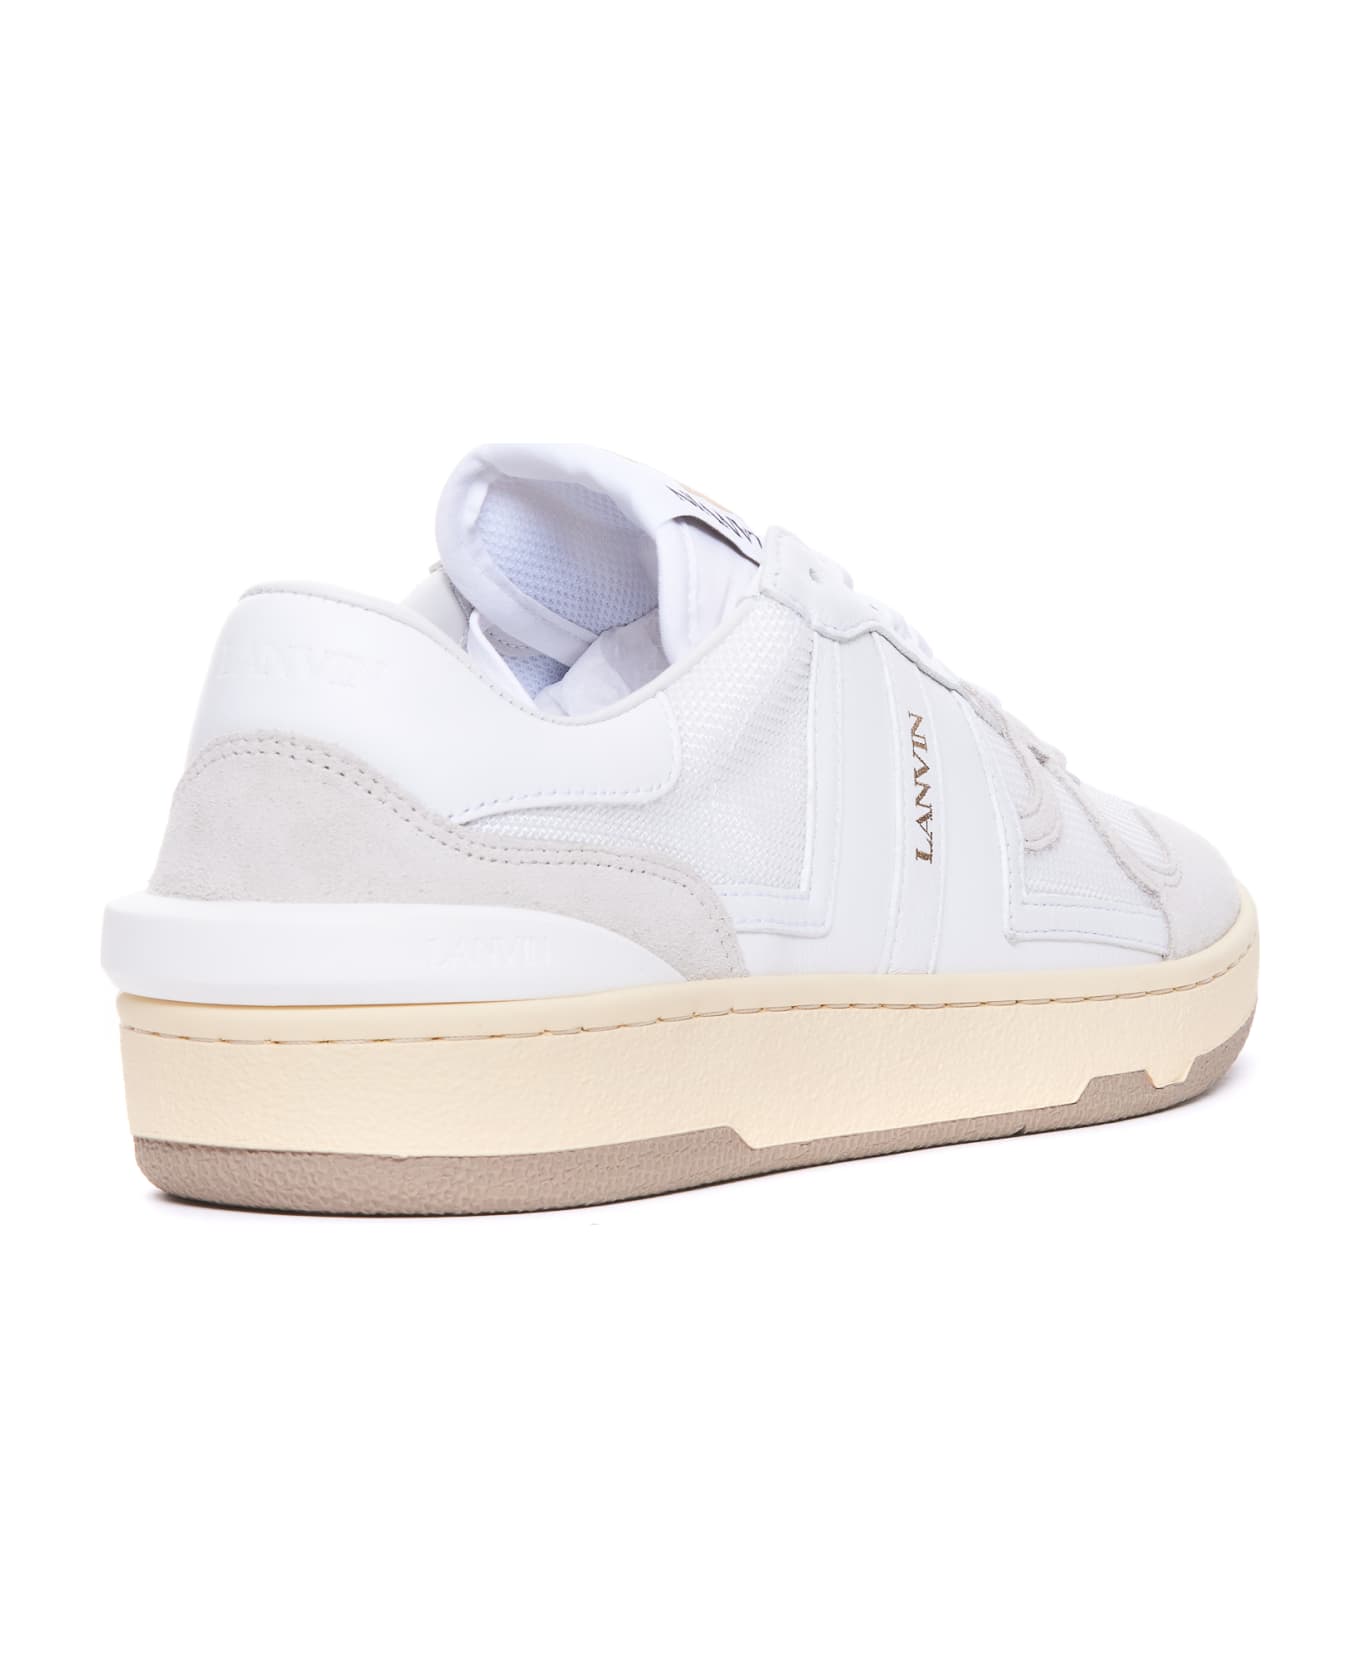 Lanvin Clay Low Top Sneakers - White スニーカー